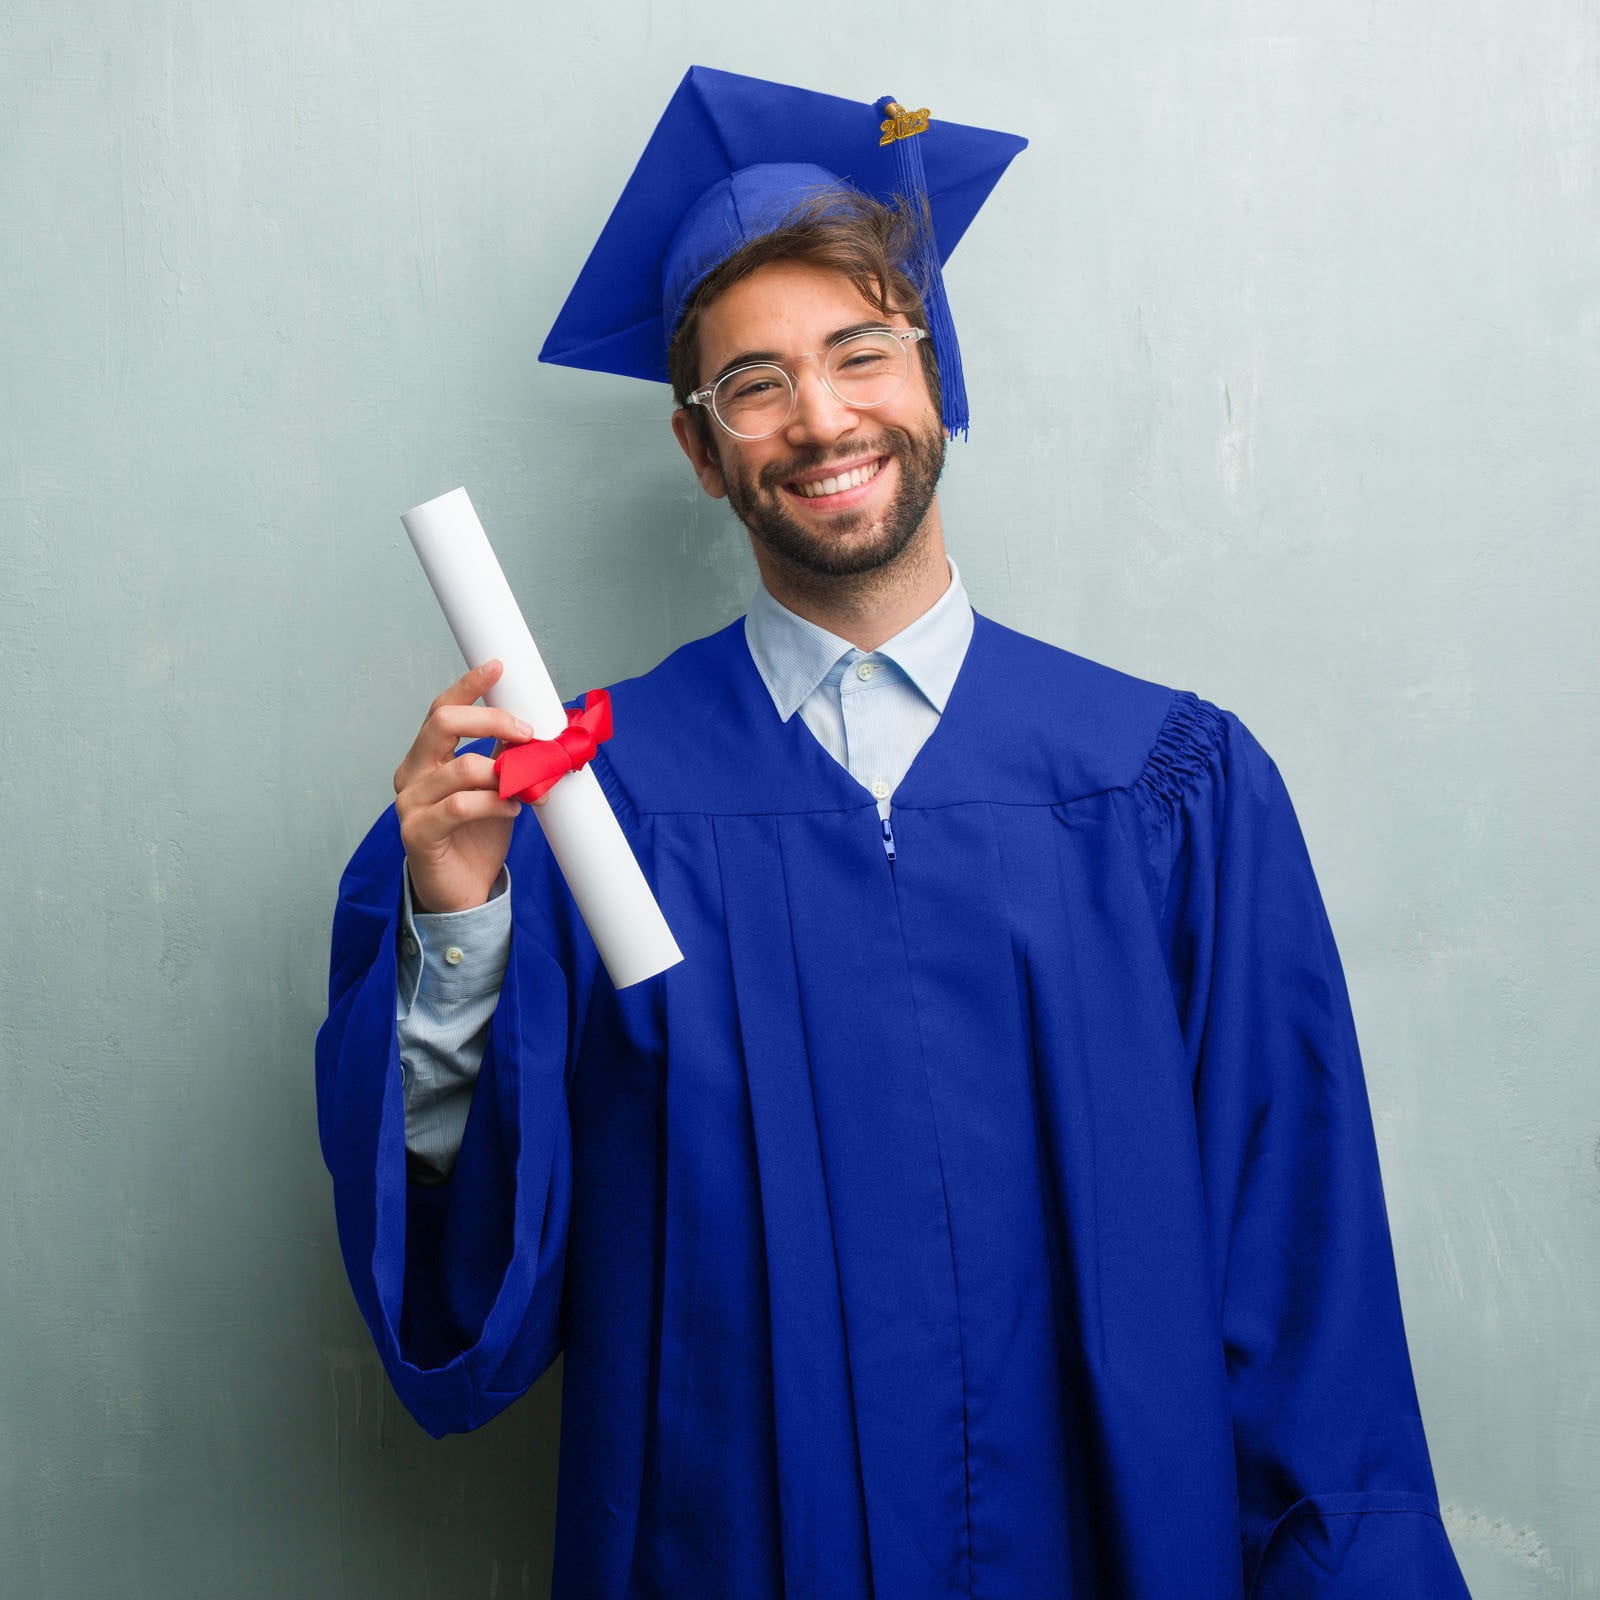 Owens Community College - Do you have a graduation cap and/or gown that you  no longer need? The Student Activities Office is taking donations of graduation  caps and gowns for students. The